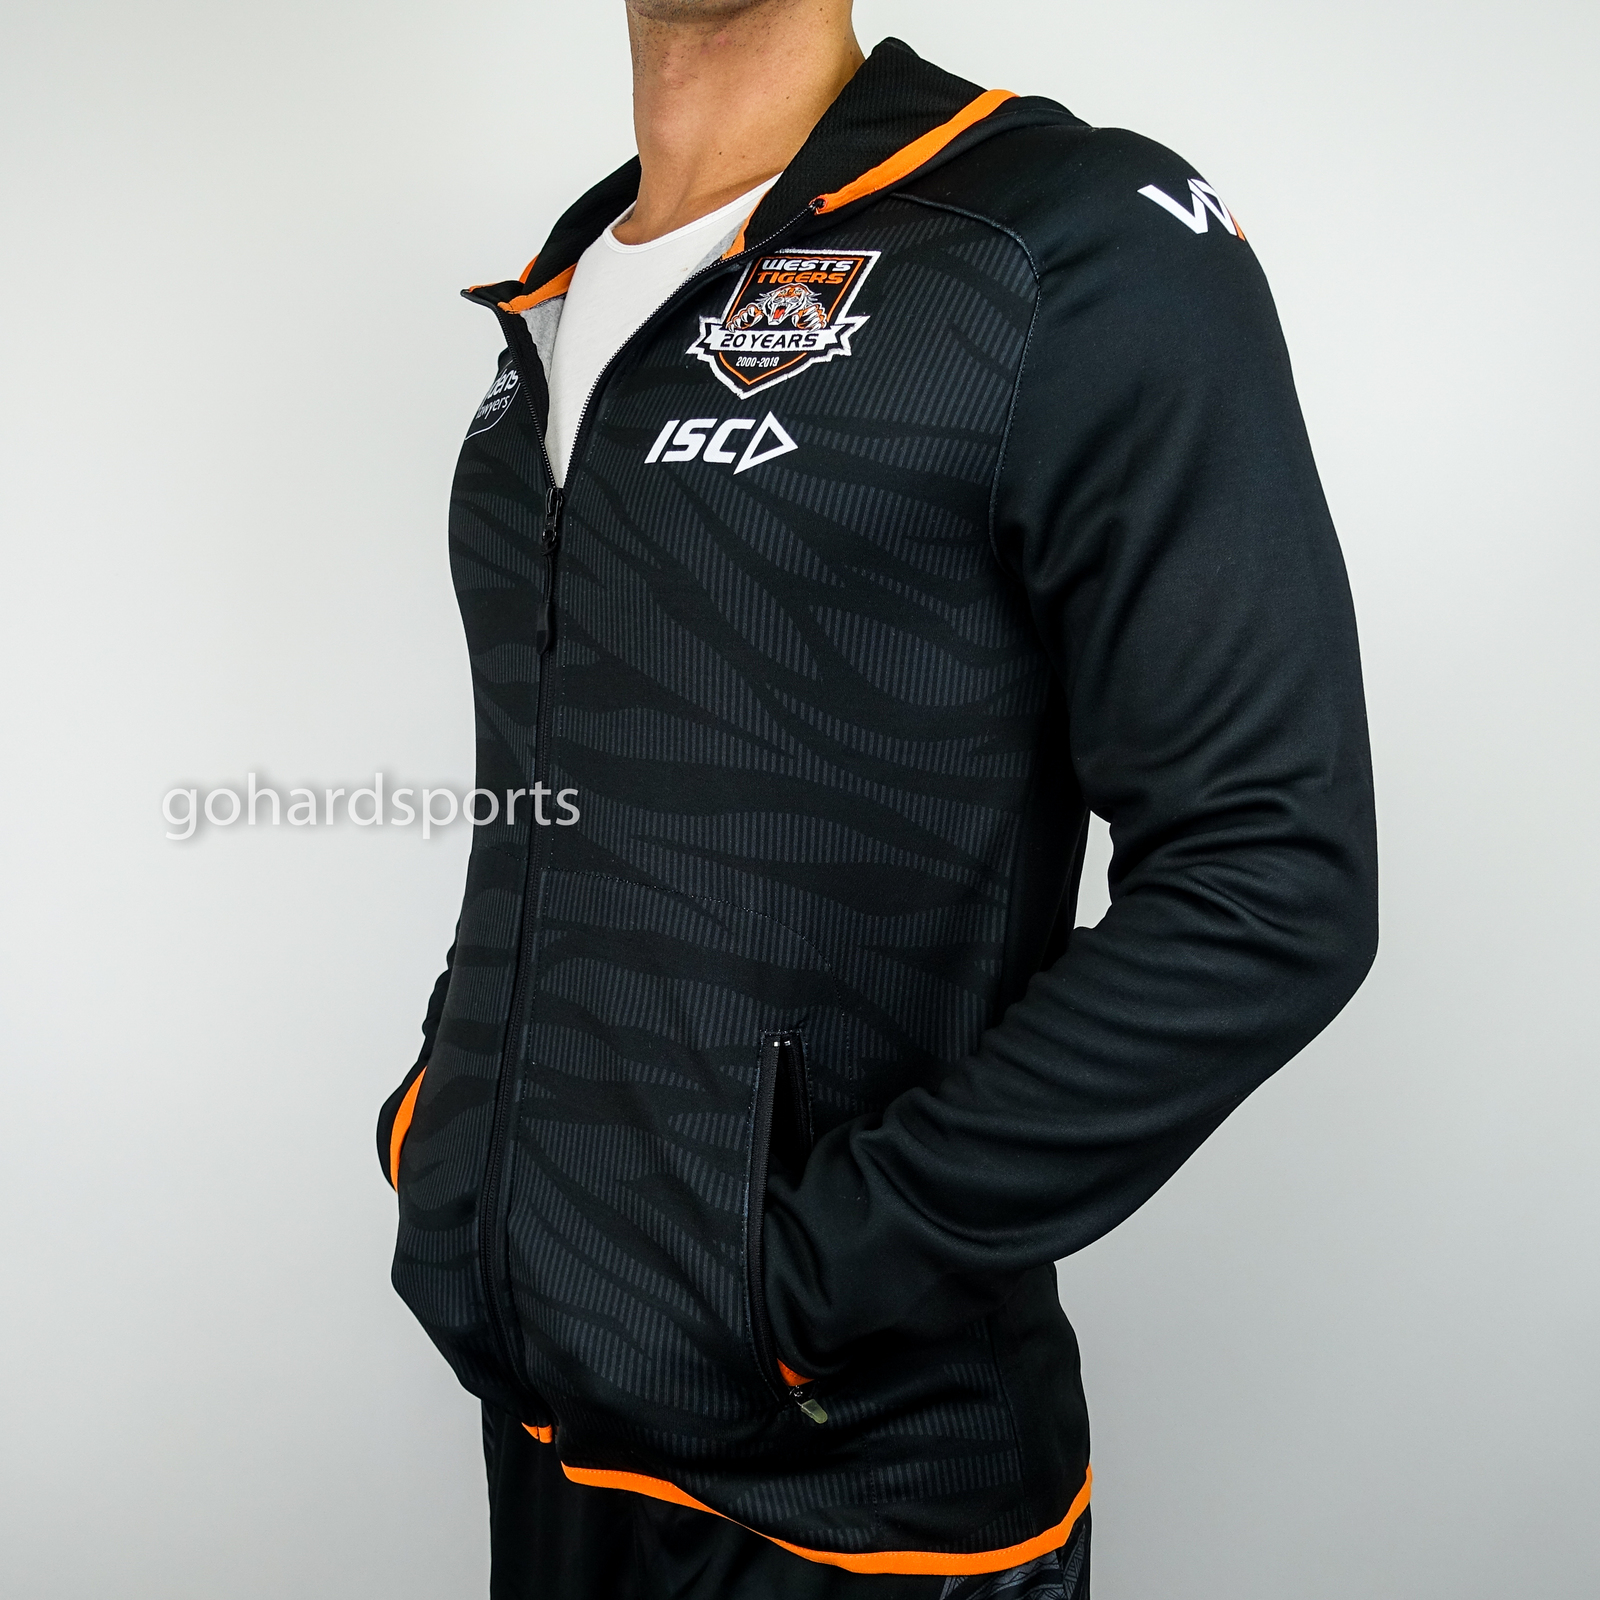 Wests Tigers NRL 2019 Track Jacket Sizes S-5XL W19 